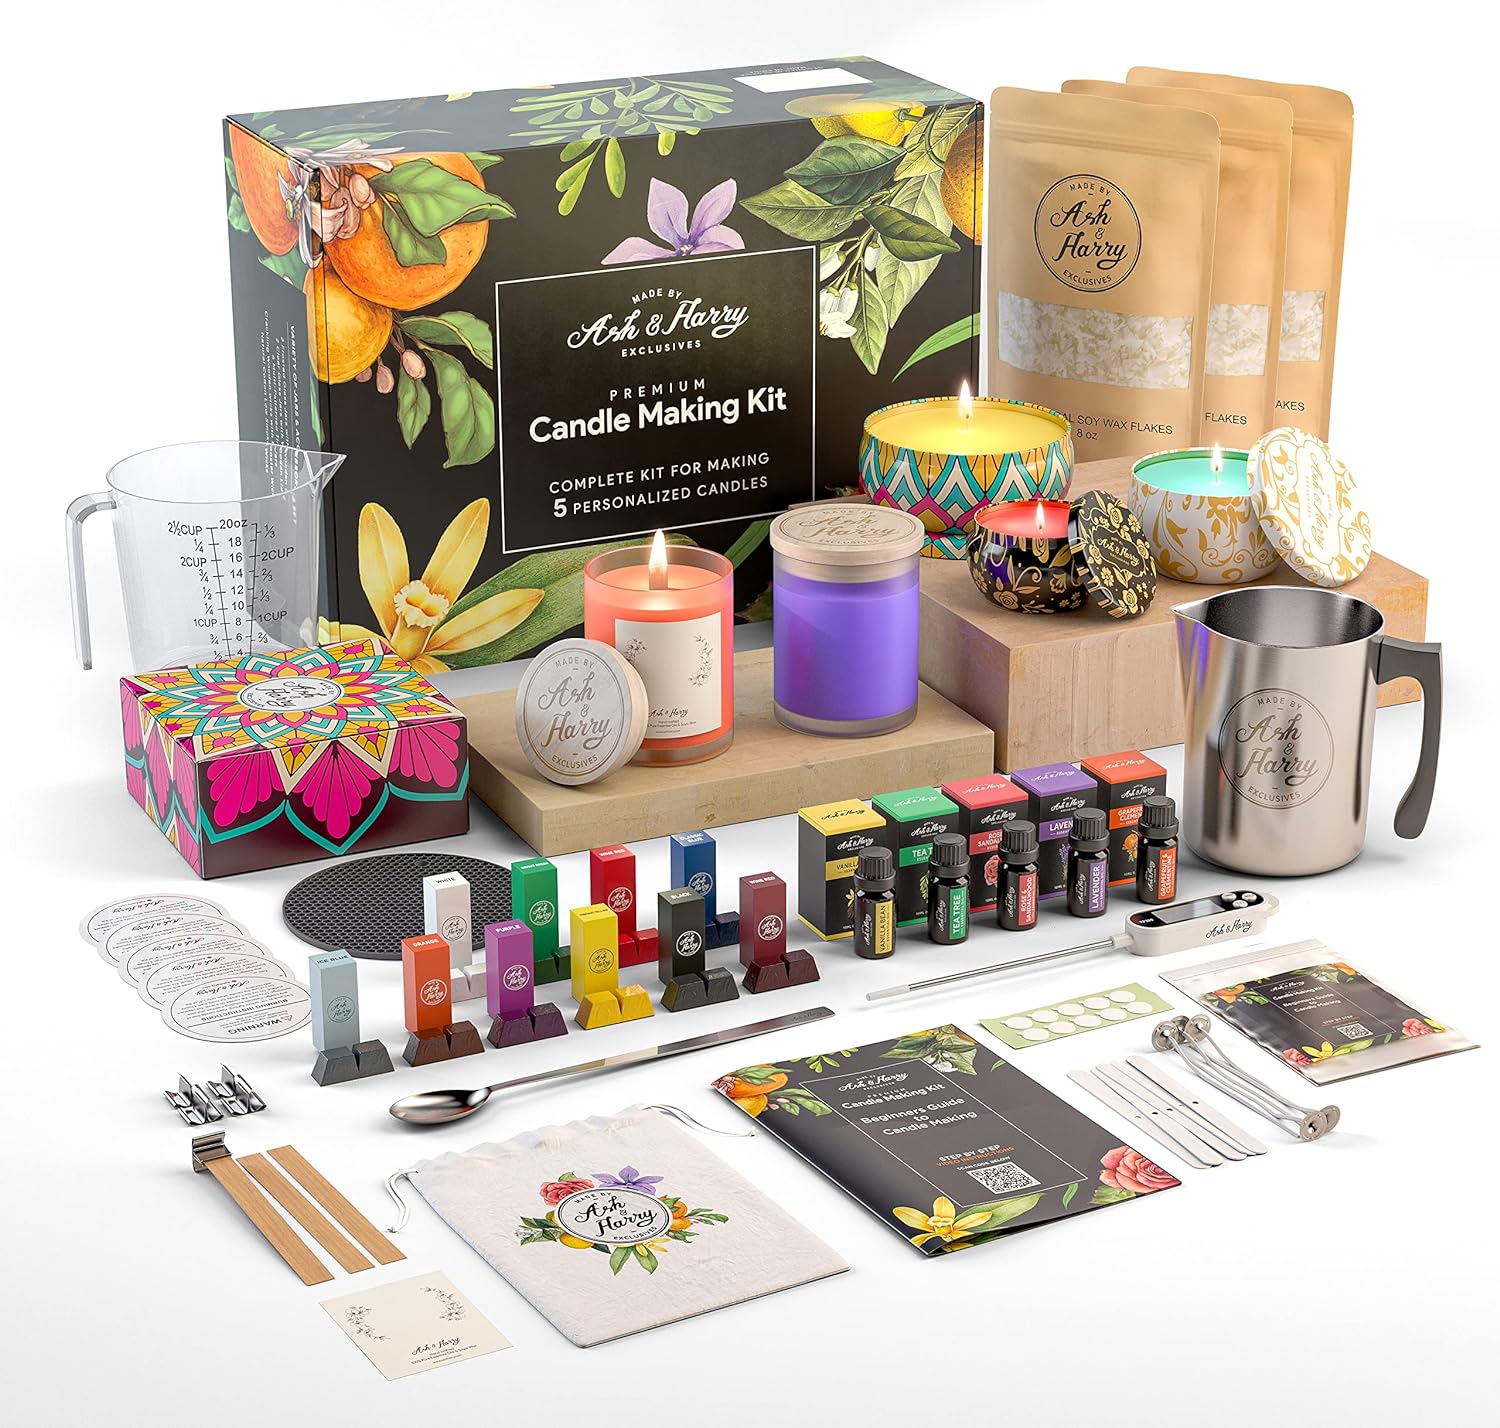 ASH & HARRY (USA Based Company Premium Soy Candle Making Kit - Full Set - Big Glass Jars & Tins Soy Wax for Candle Making - DIY Starter Candles